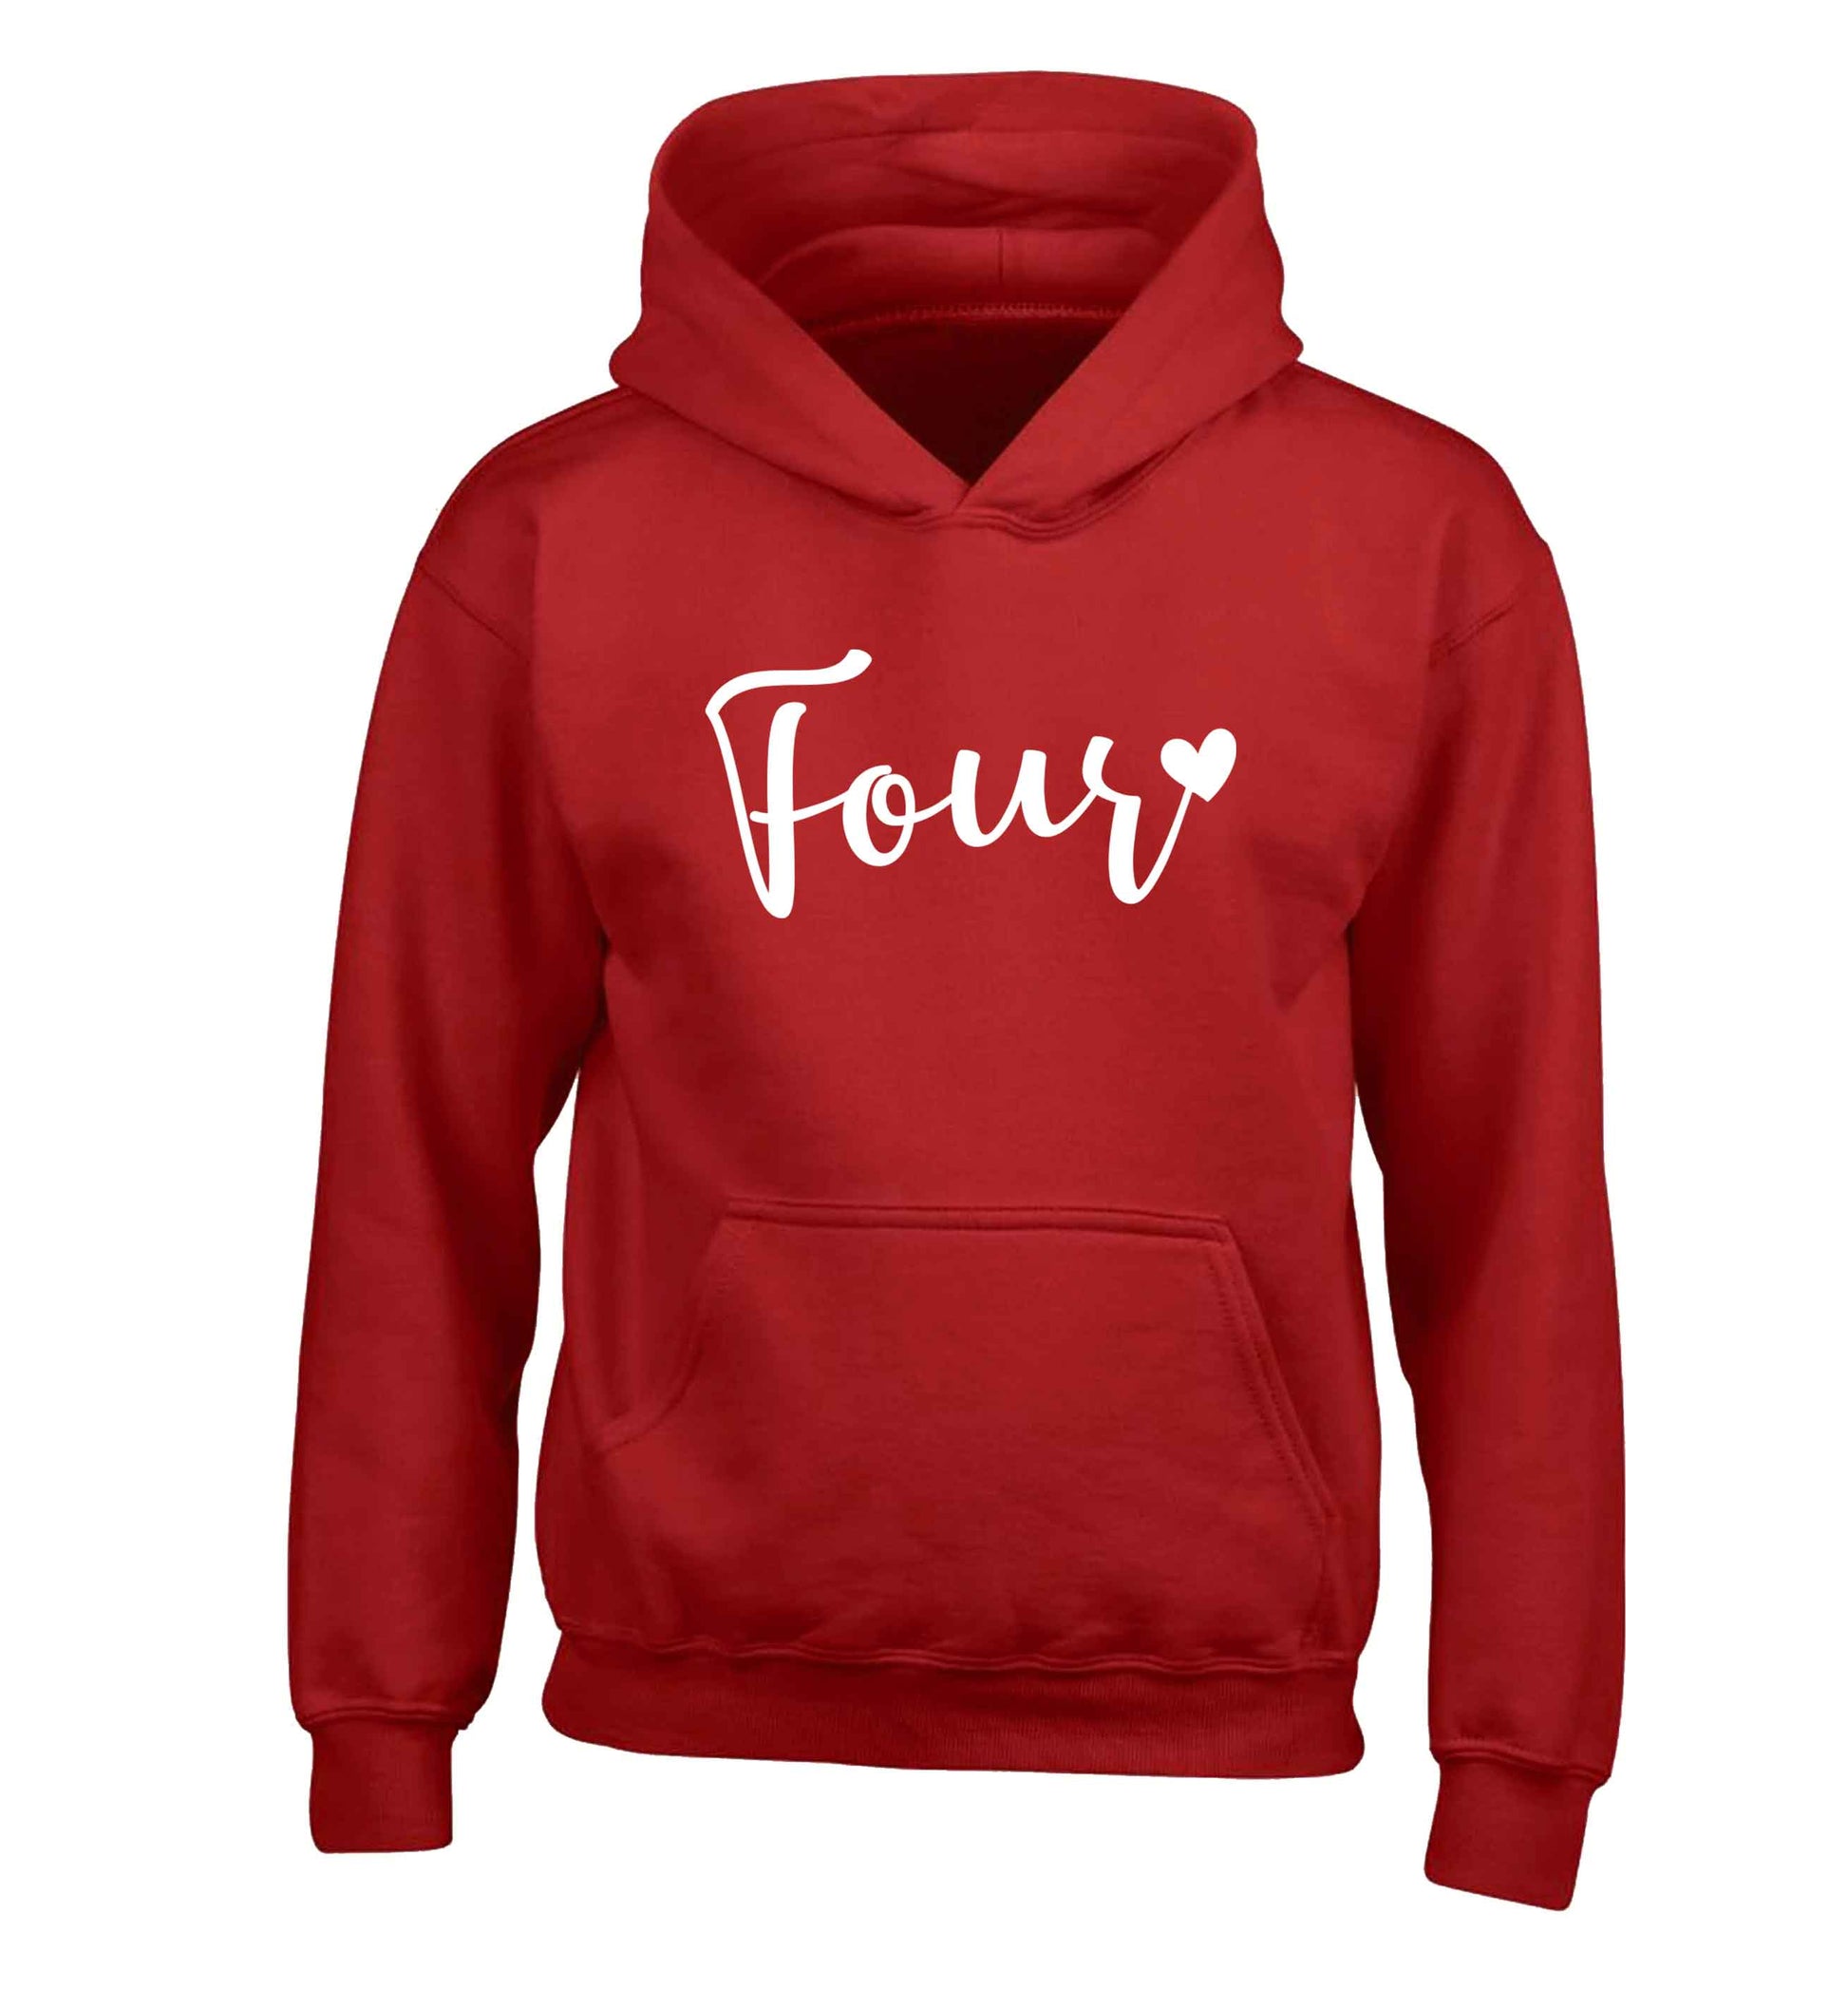 Four and heart children's red hoodie 12-13 Years